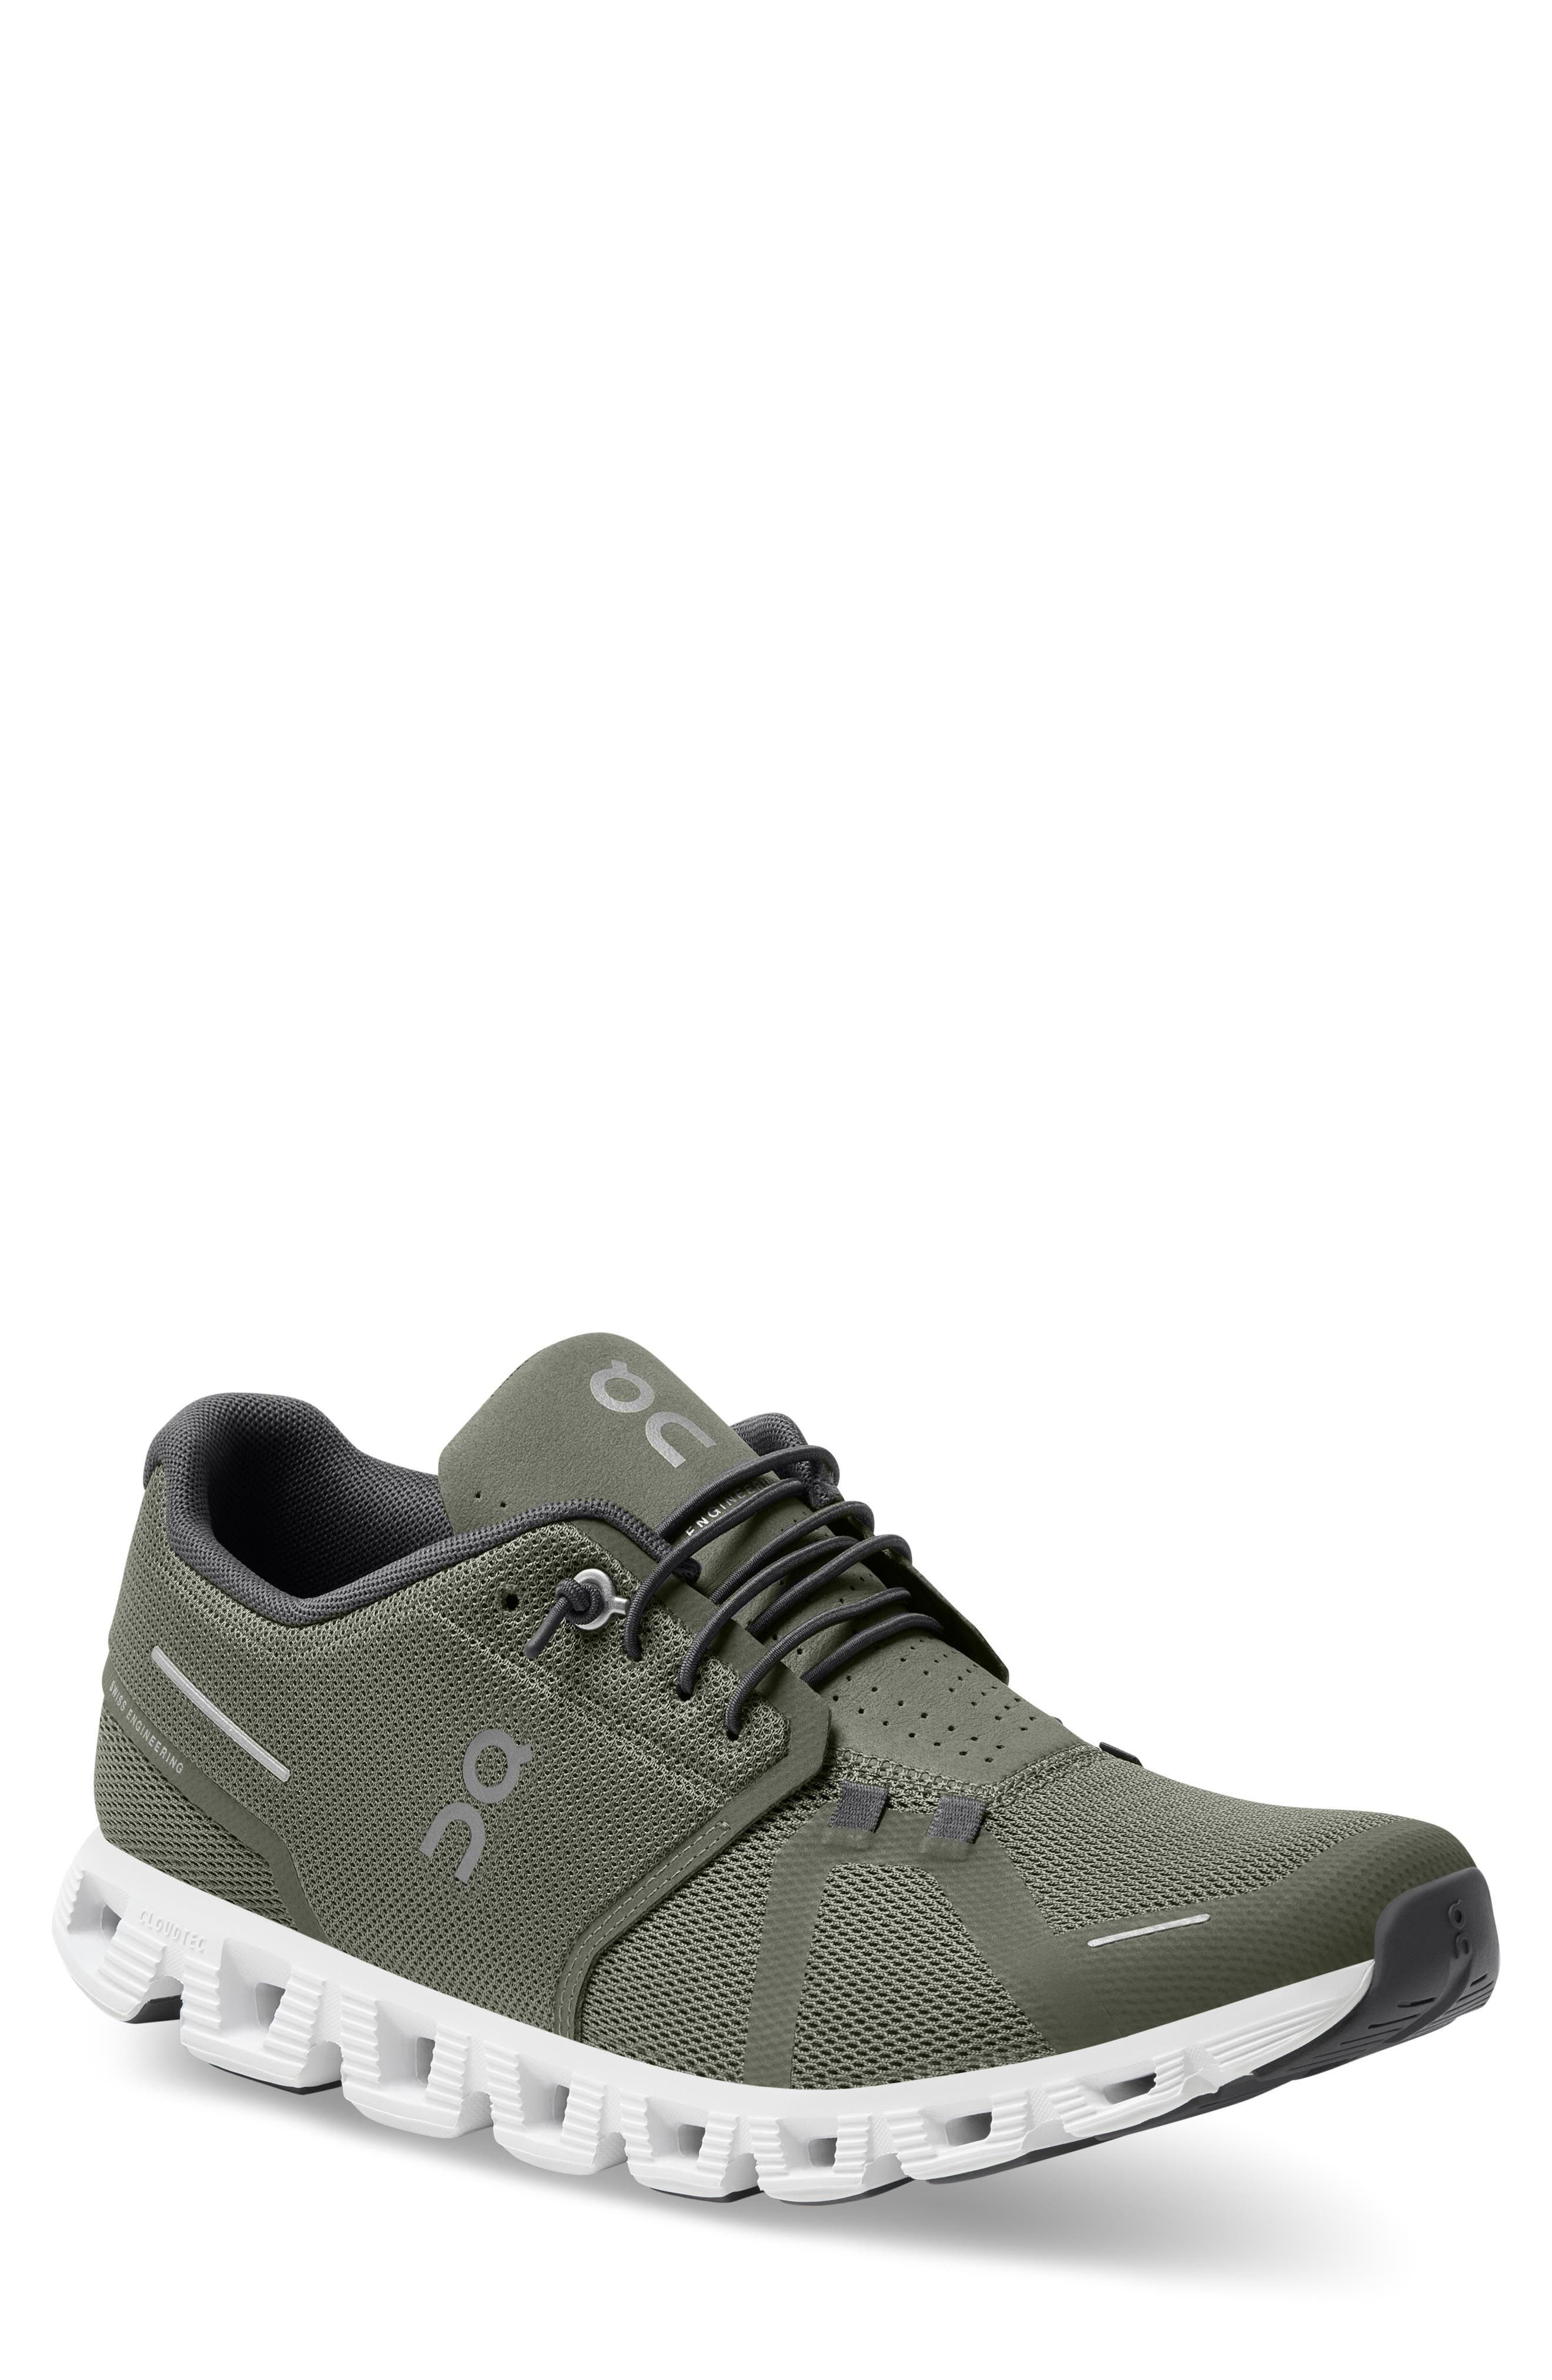 On Cloud 5 Running Shoe in Olive/White at Nordstrom, Size 10.5 | Nordstrom